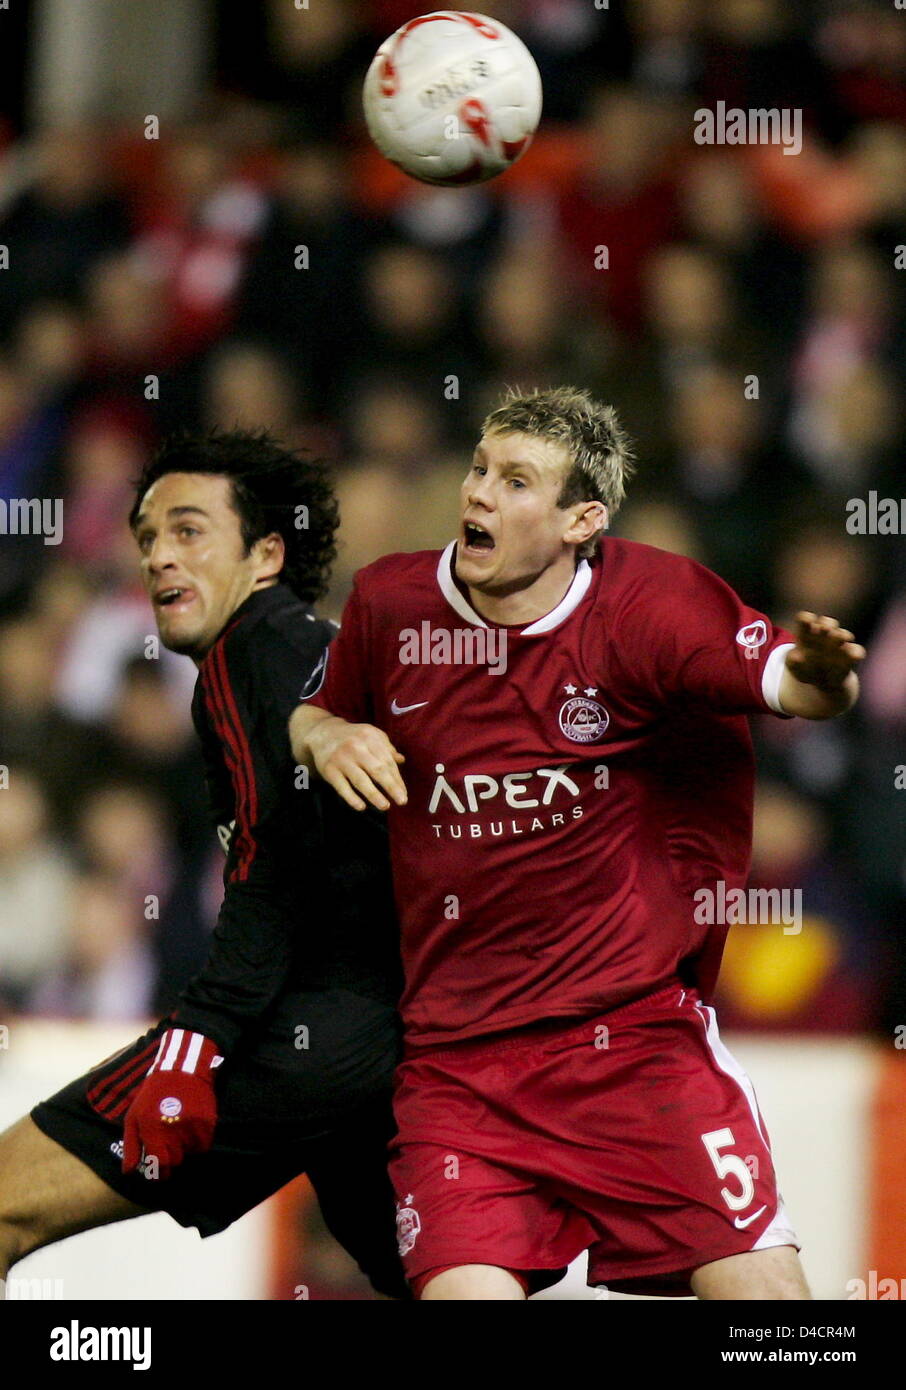 Bayern Munich's Luca Toni and Aberdeen's Zander Diamond are pictured in action during their UEFA Cup soccer match at Pittodrie stadium, Aberdeen, Scottland, 14 February 2008. Photo: MATTHIAS SCHRADER Stock Photo